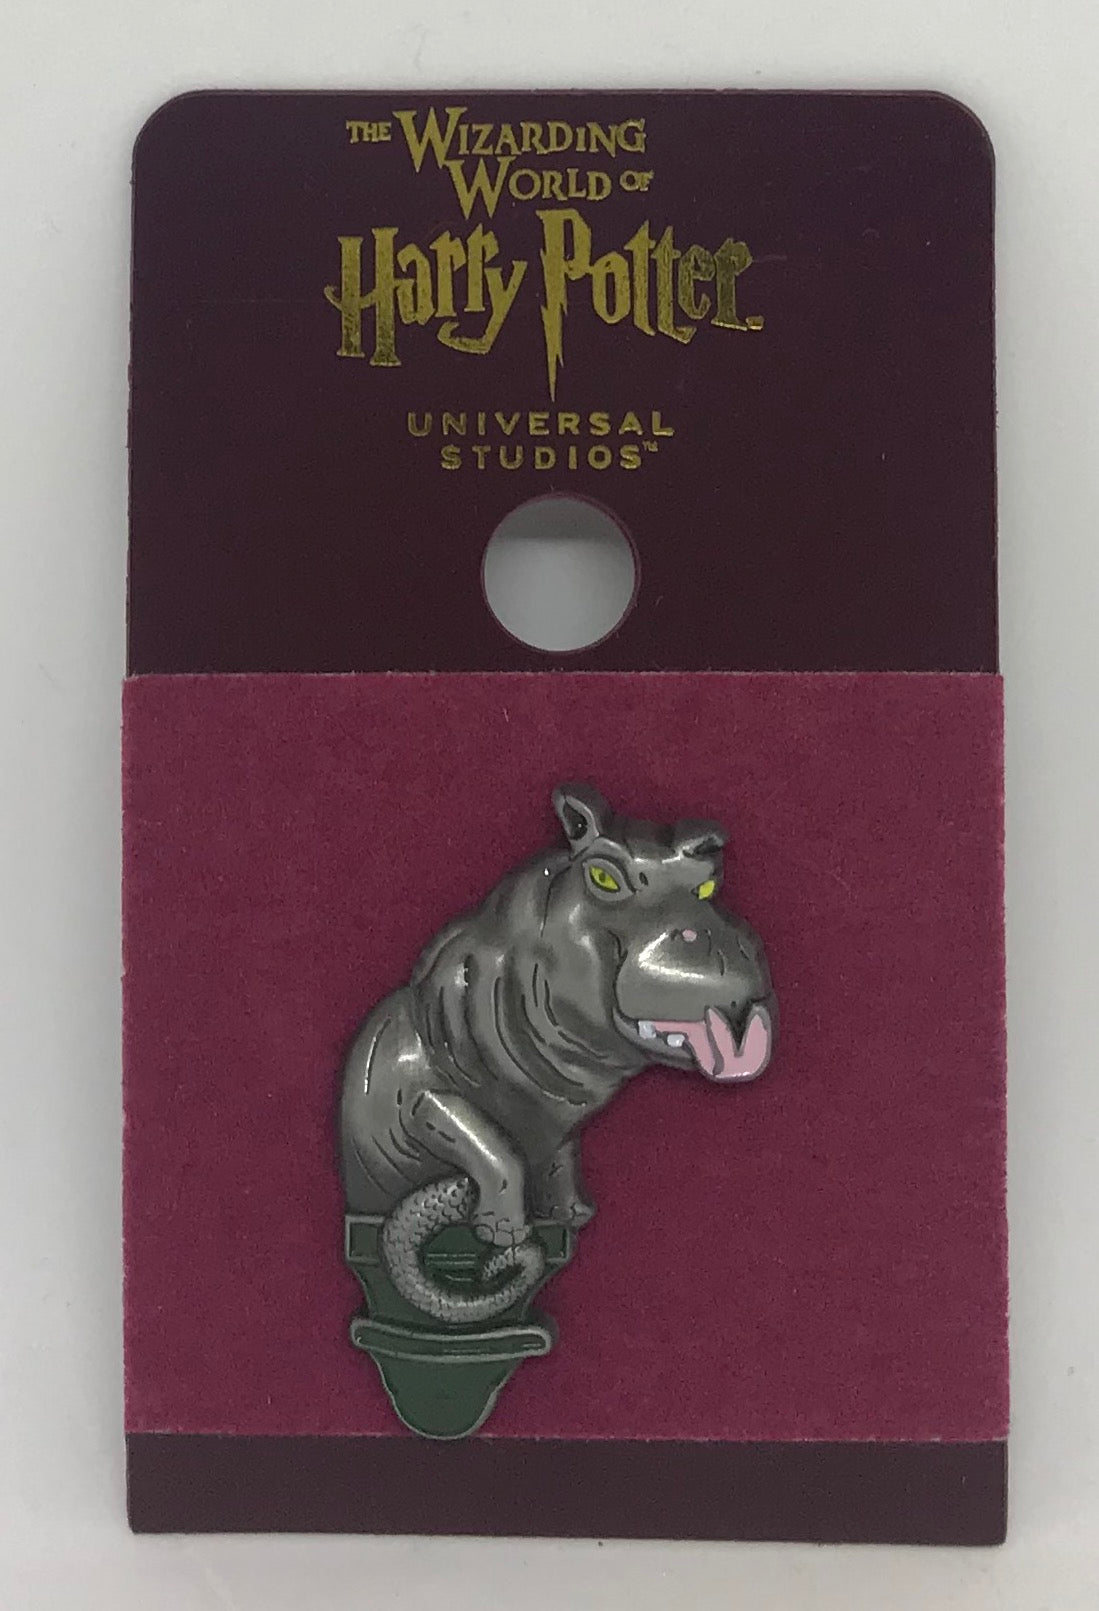 Universal Studios Wizarding World Of Harry Potter Magical Menagerie Hippo Pin